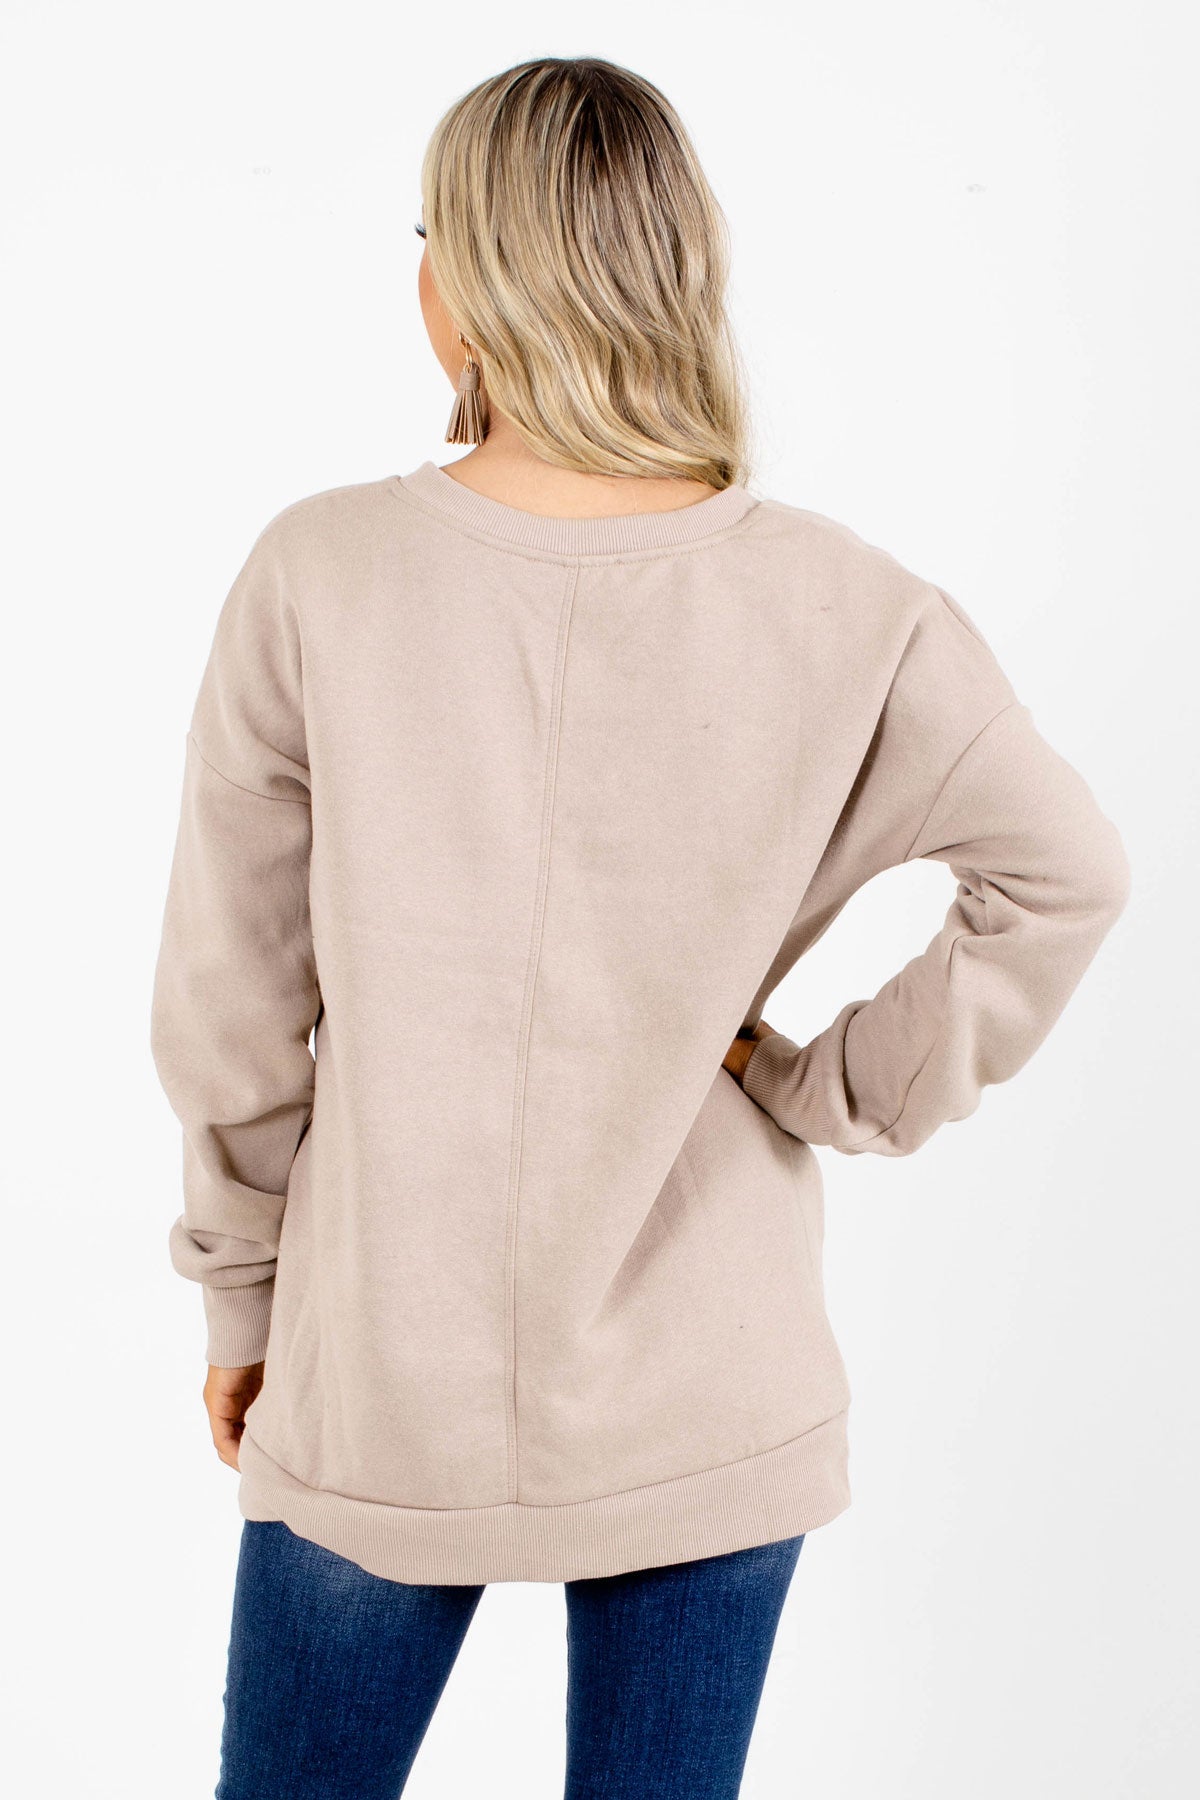 Women's Tan Pullover Boutique Sweater